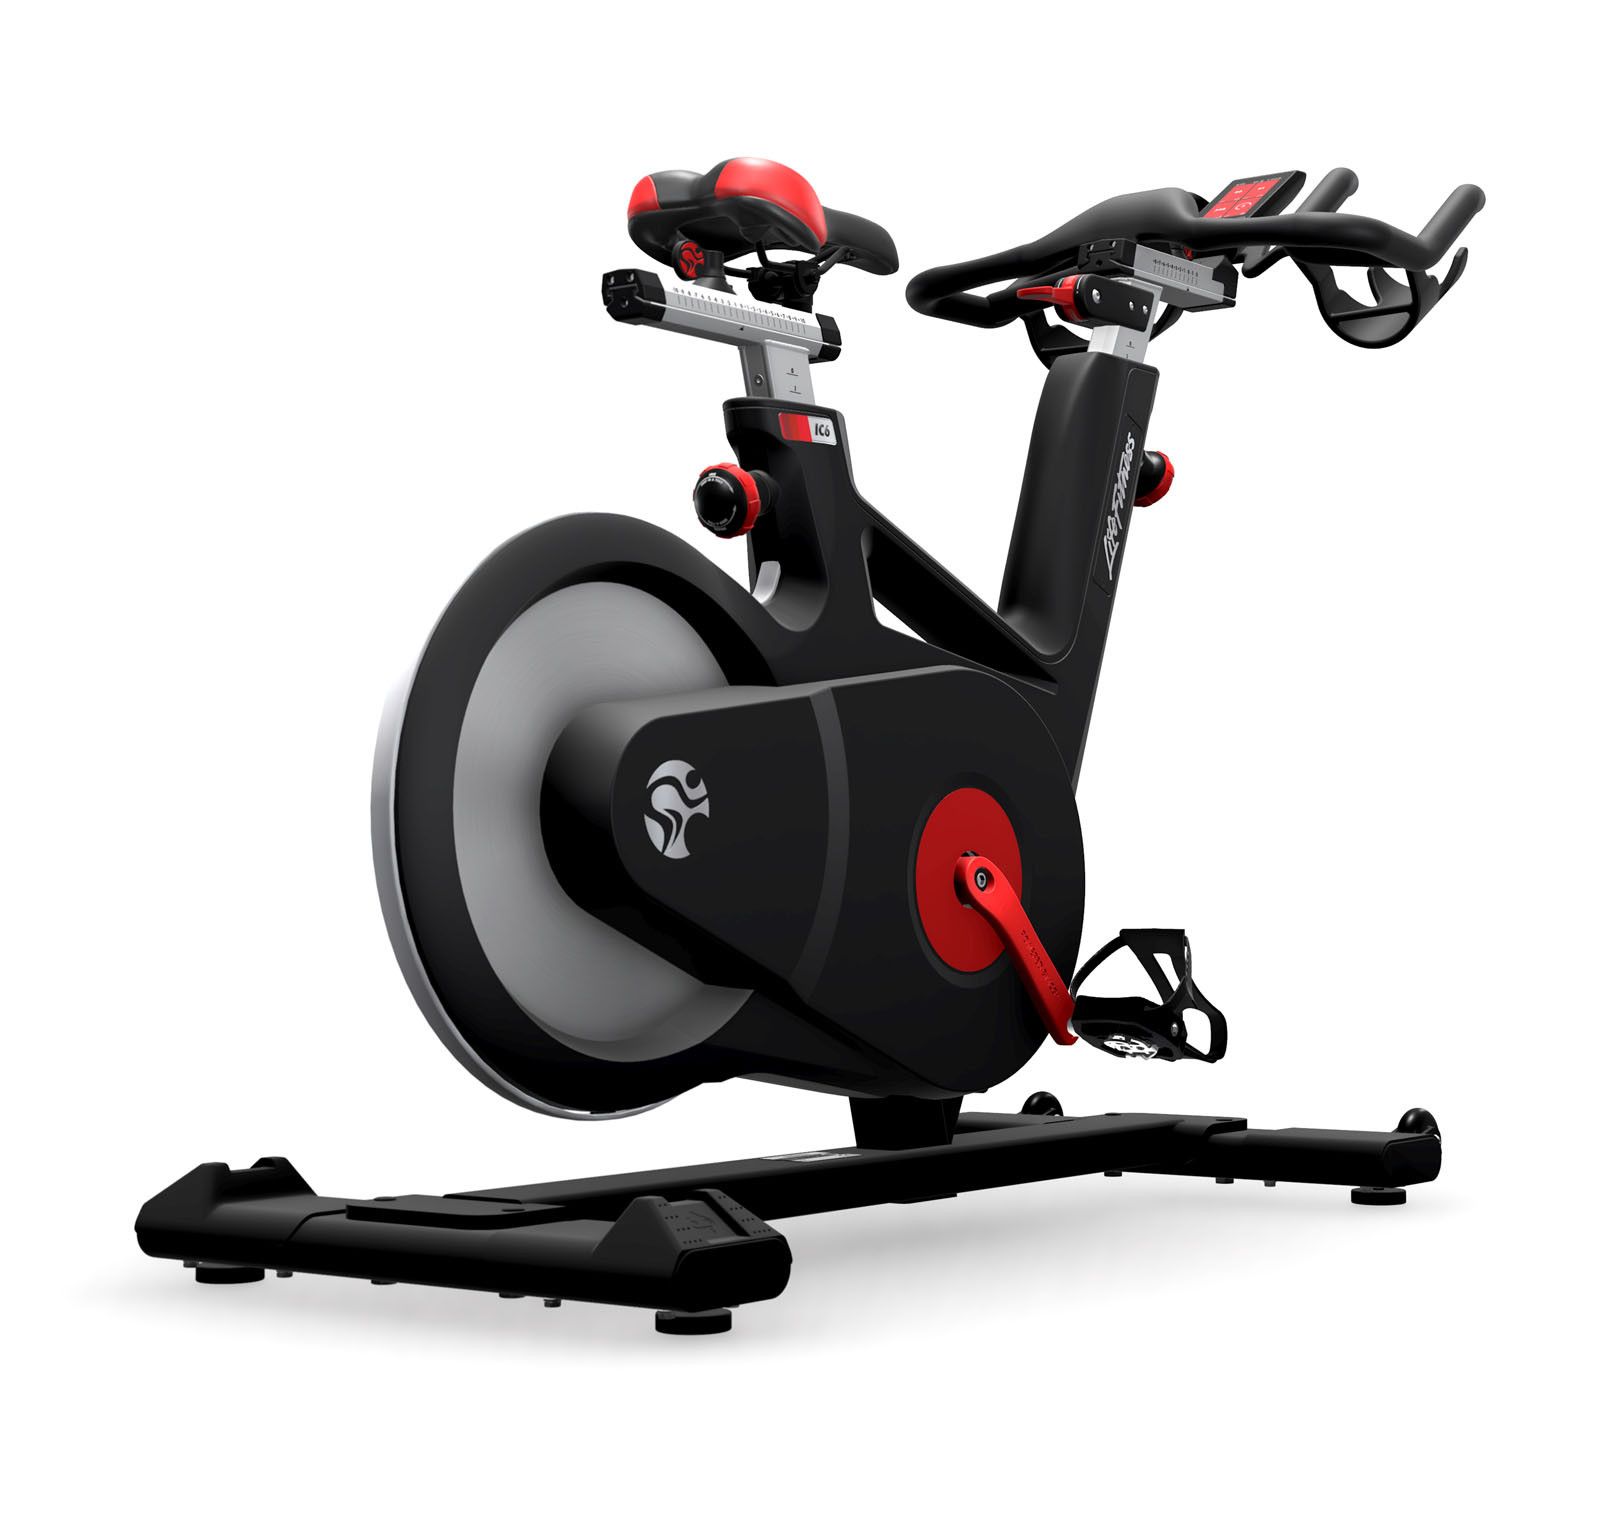 ICG Life Fitness iC6 Spin bike (PRe-Owned)